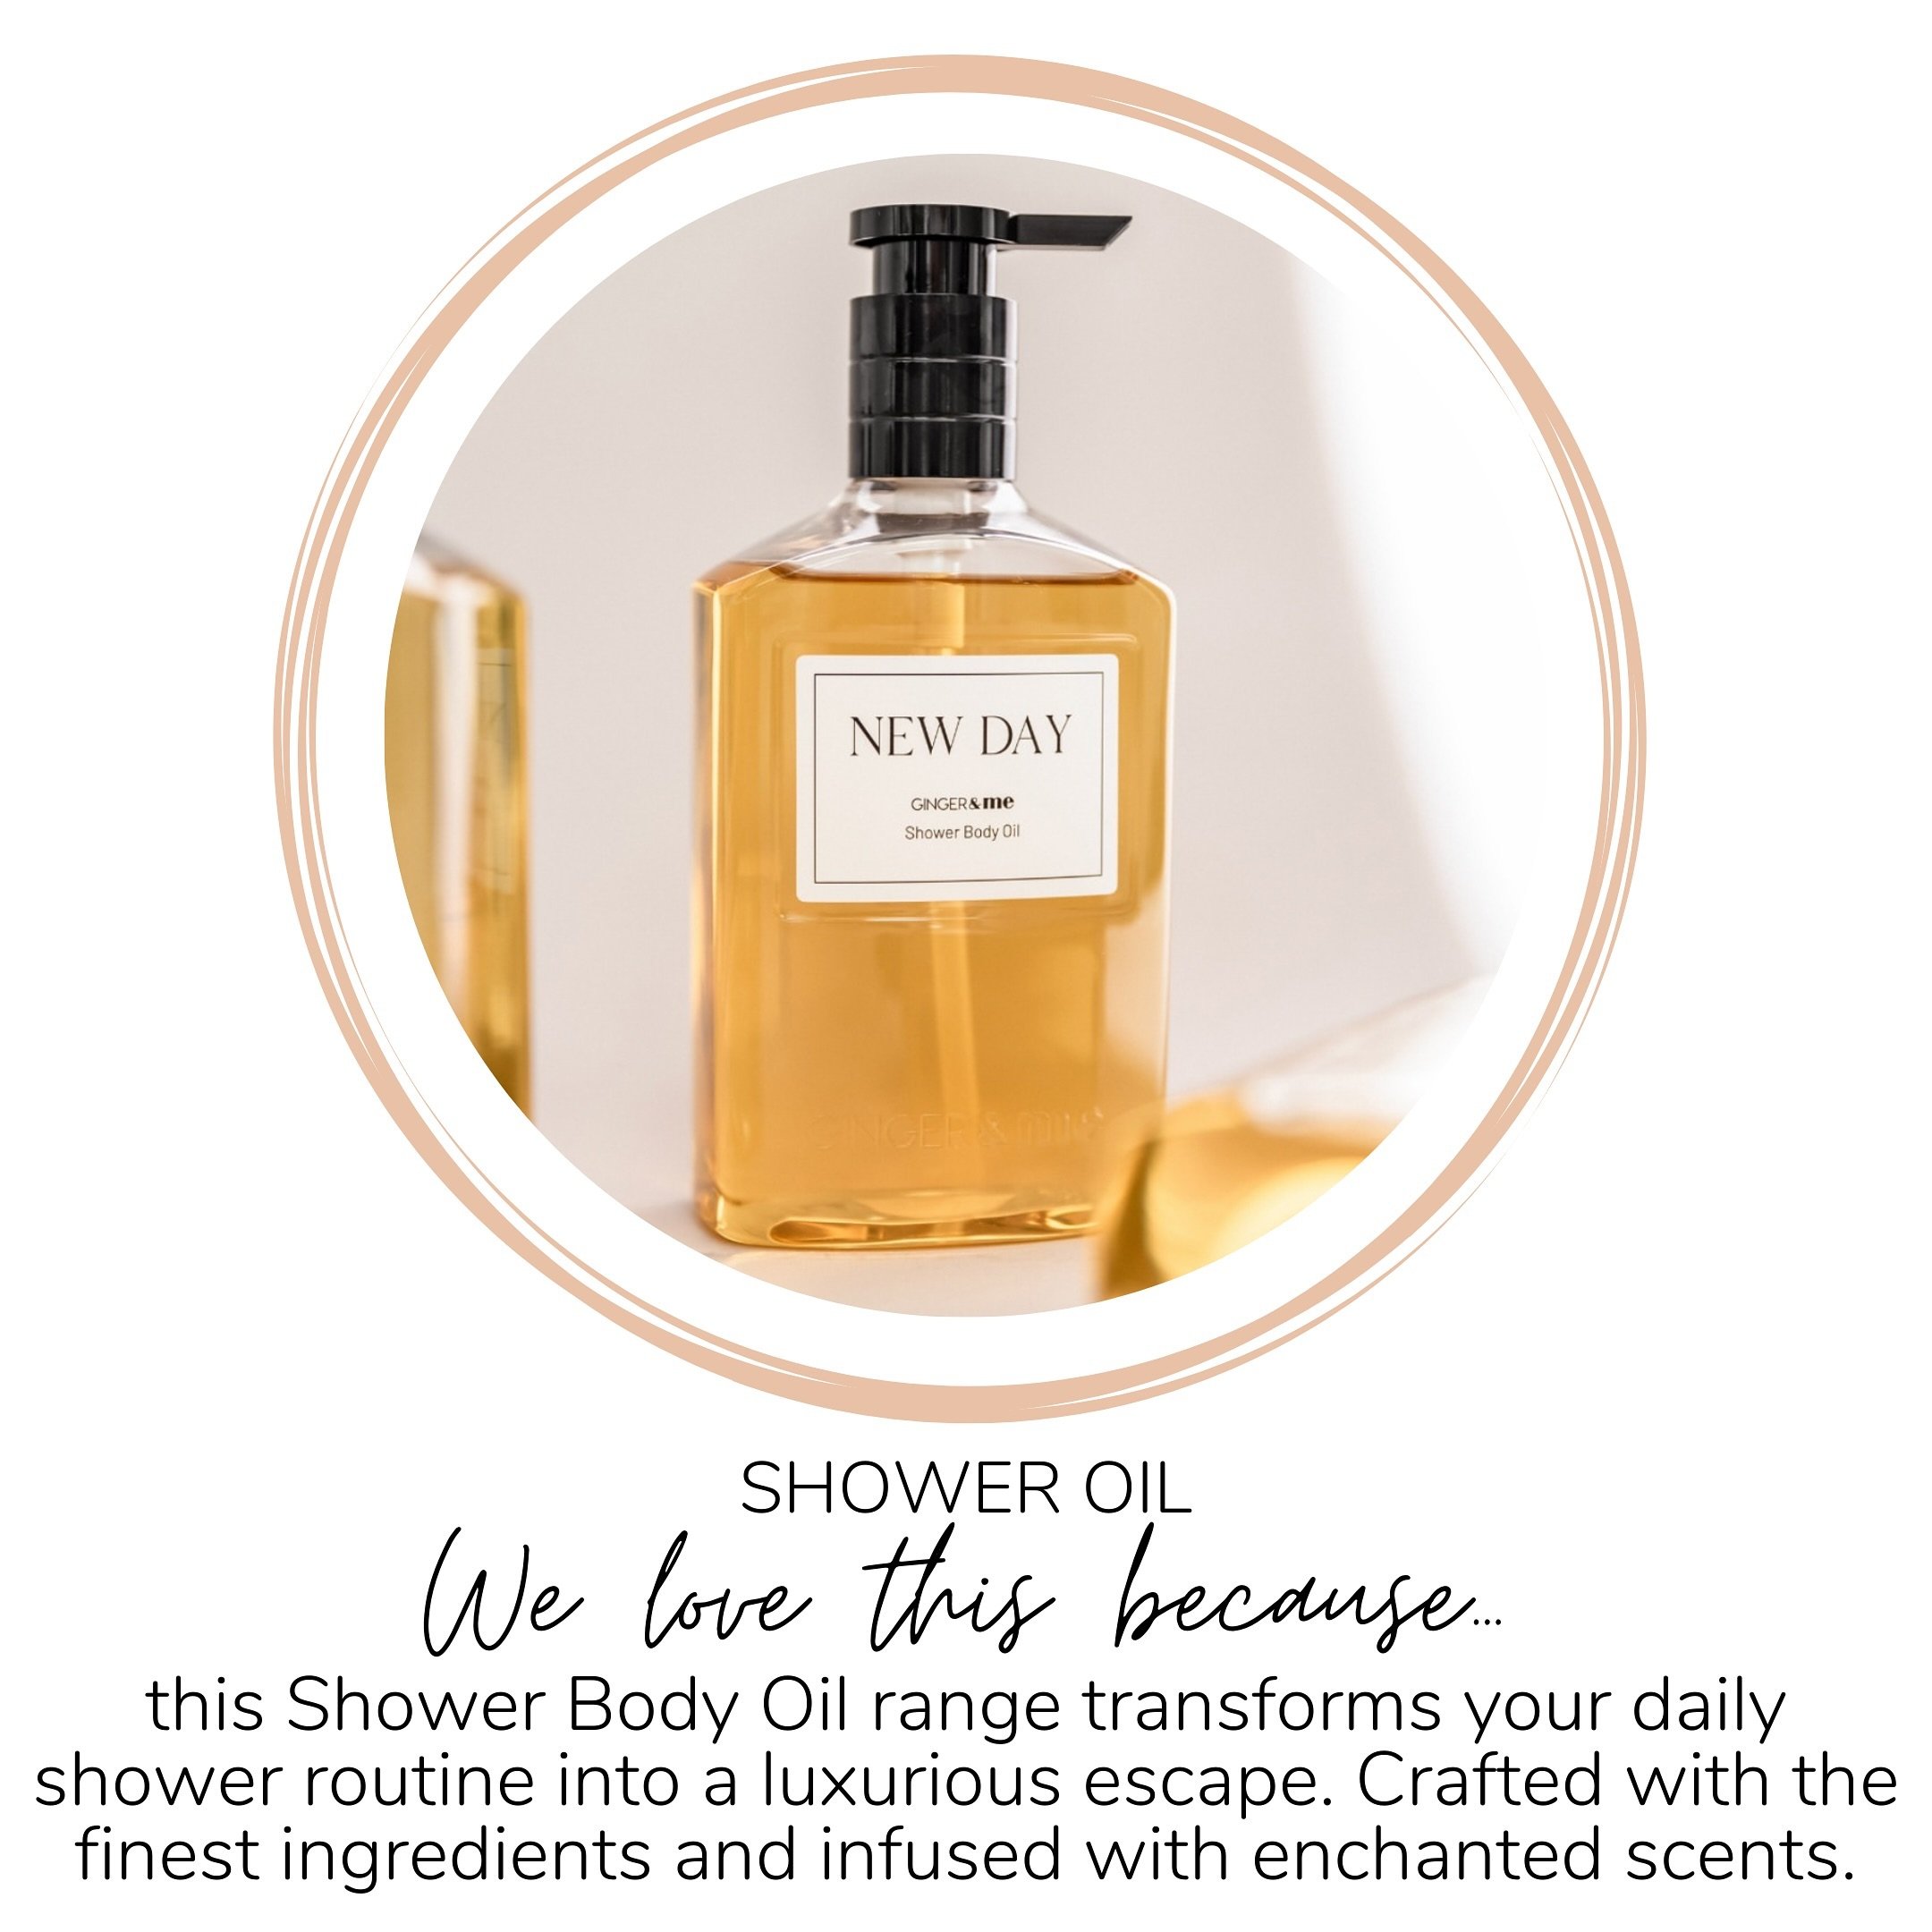 Designed to elevate self-care rituals and elevate gifting from just &ldquo;the thought that counts&rdquo; to thoughtful, GINGER&amp;ME&rsquo;s latest offering embodies the brand&rsquo;s commitment to holistic well-being and sensory delight!

Transfor